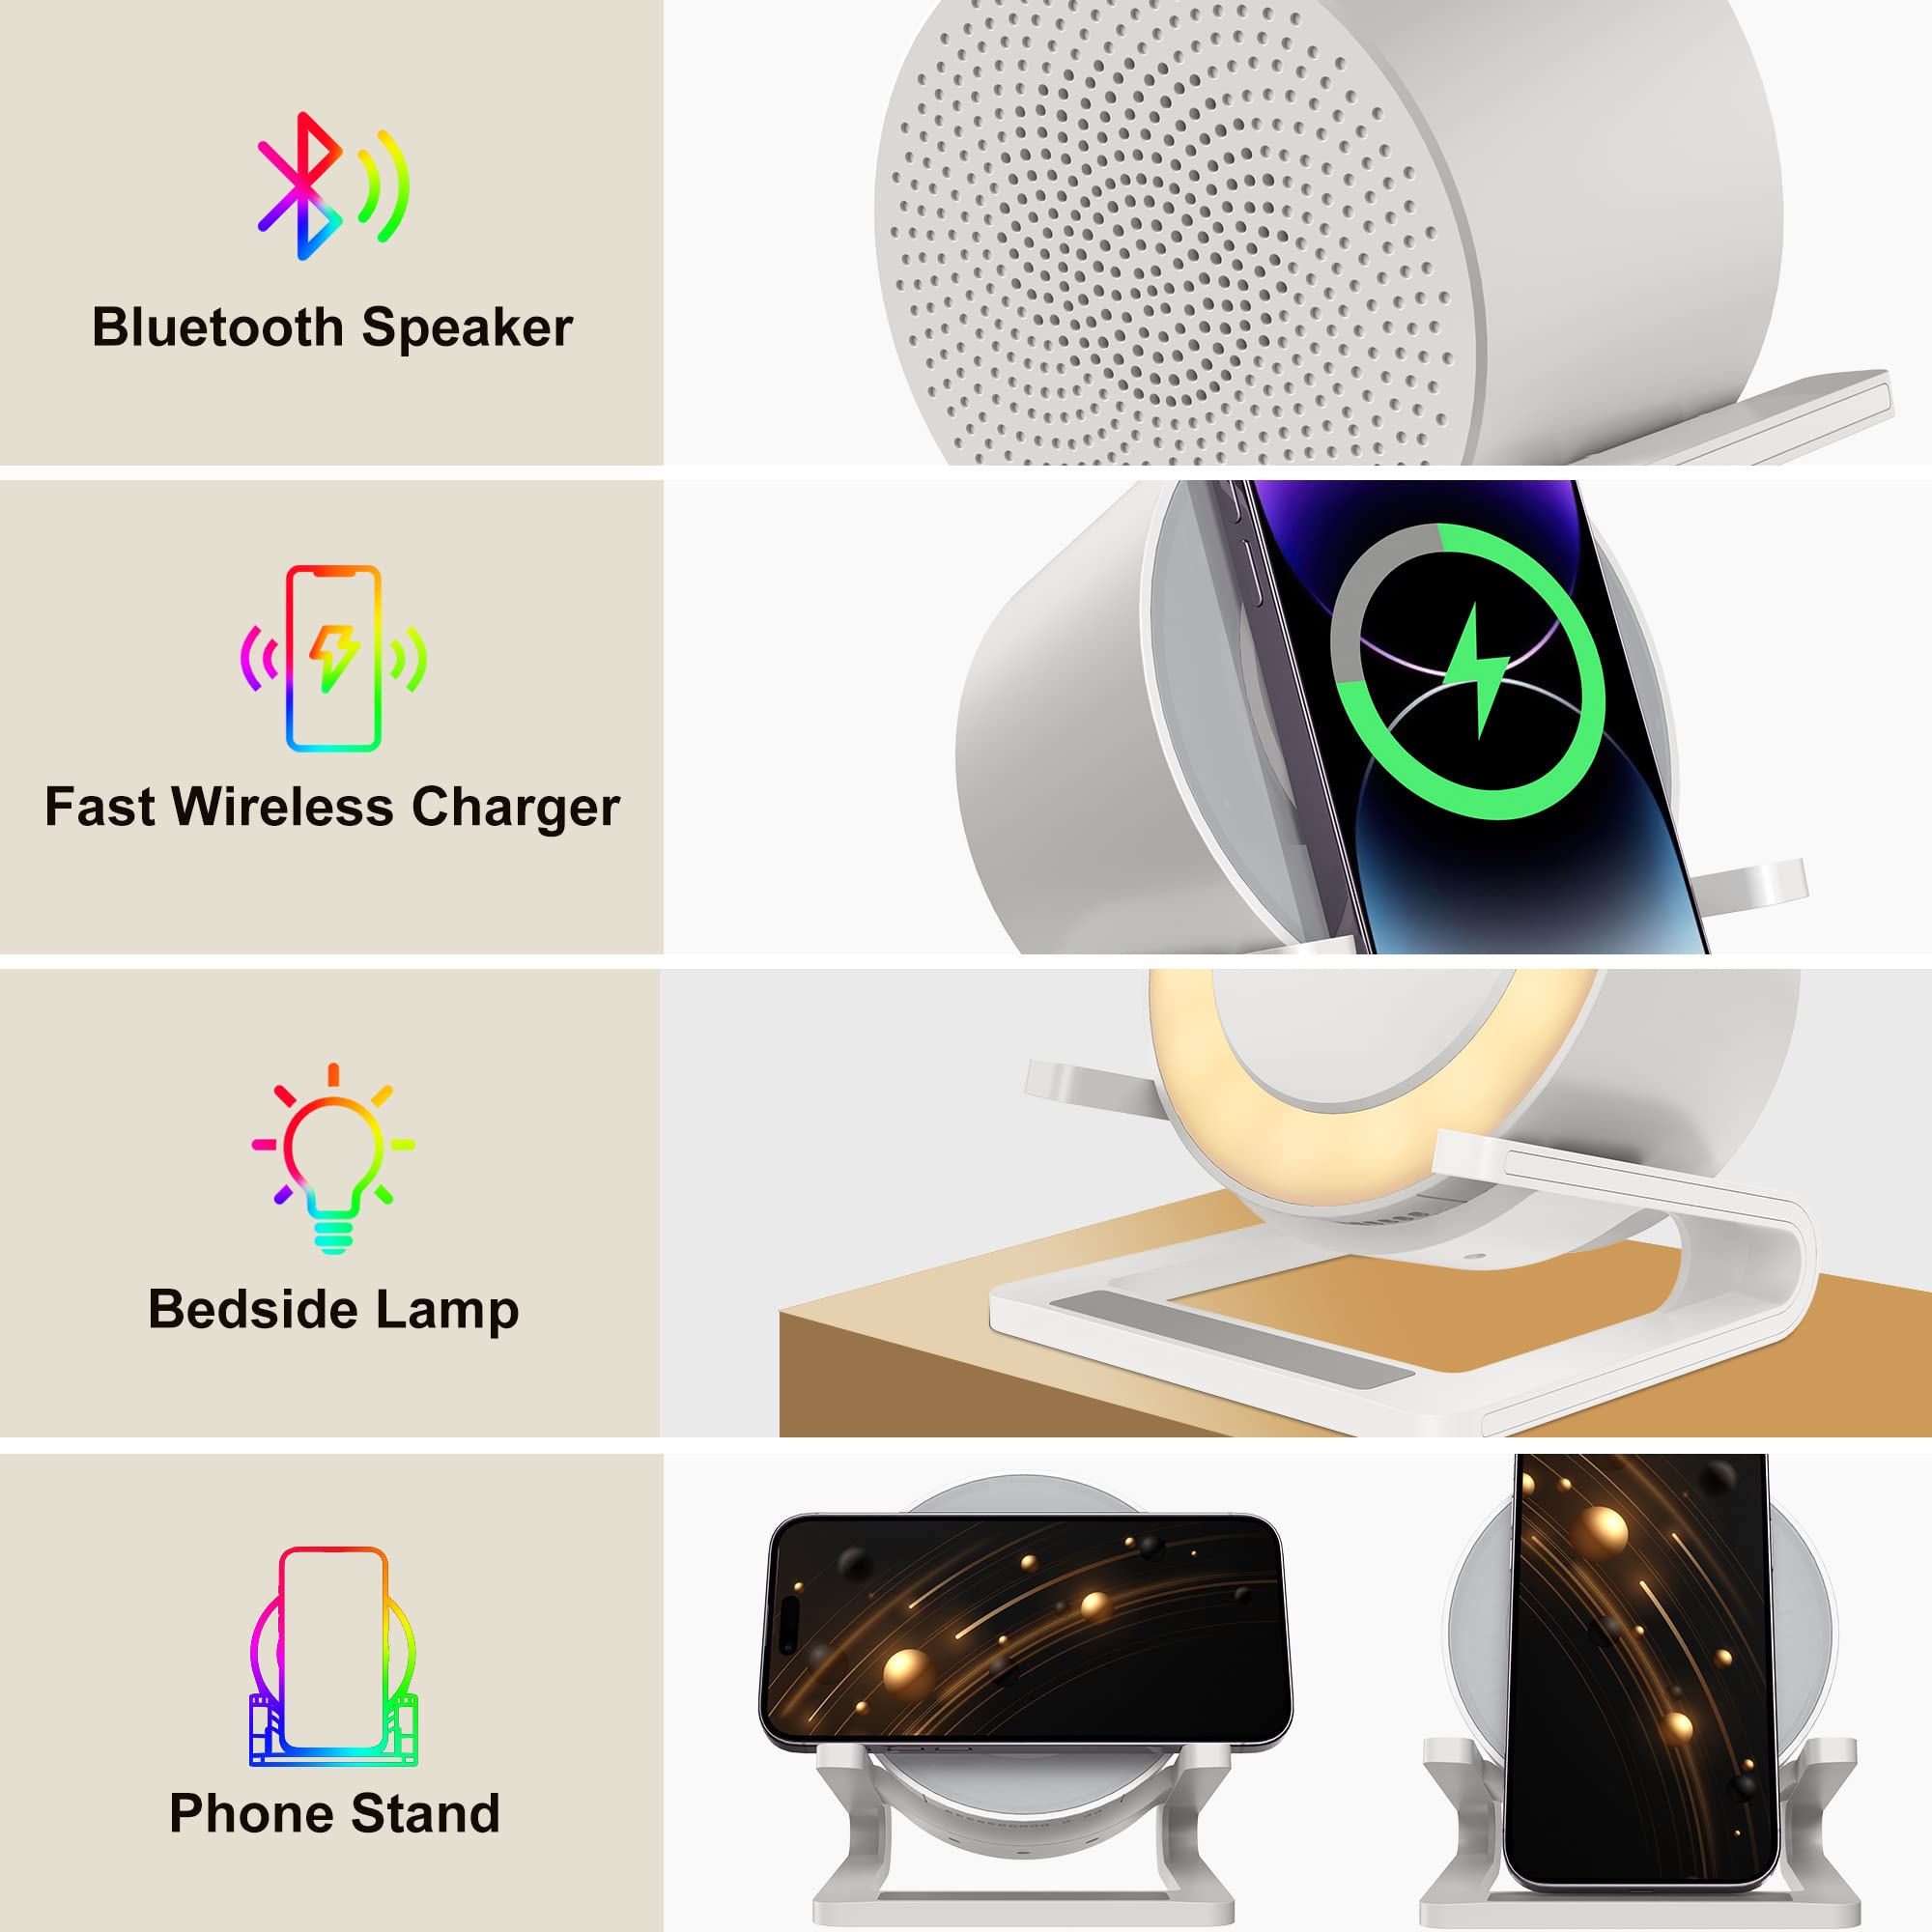 Birthday Gifts for Women, 3 in 1 Charging Station Apple with Bluetooth Speakers, LED Night Light, 15W Wireless Charger Stand, Gifts for Women, Men, Mom, Girlfriend